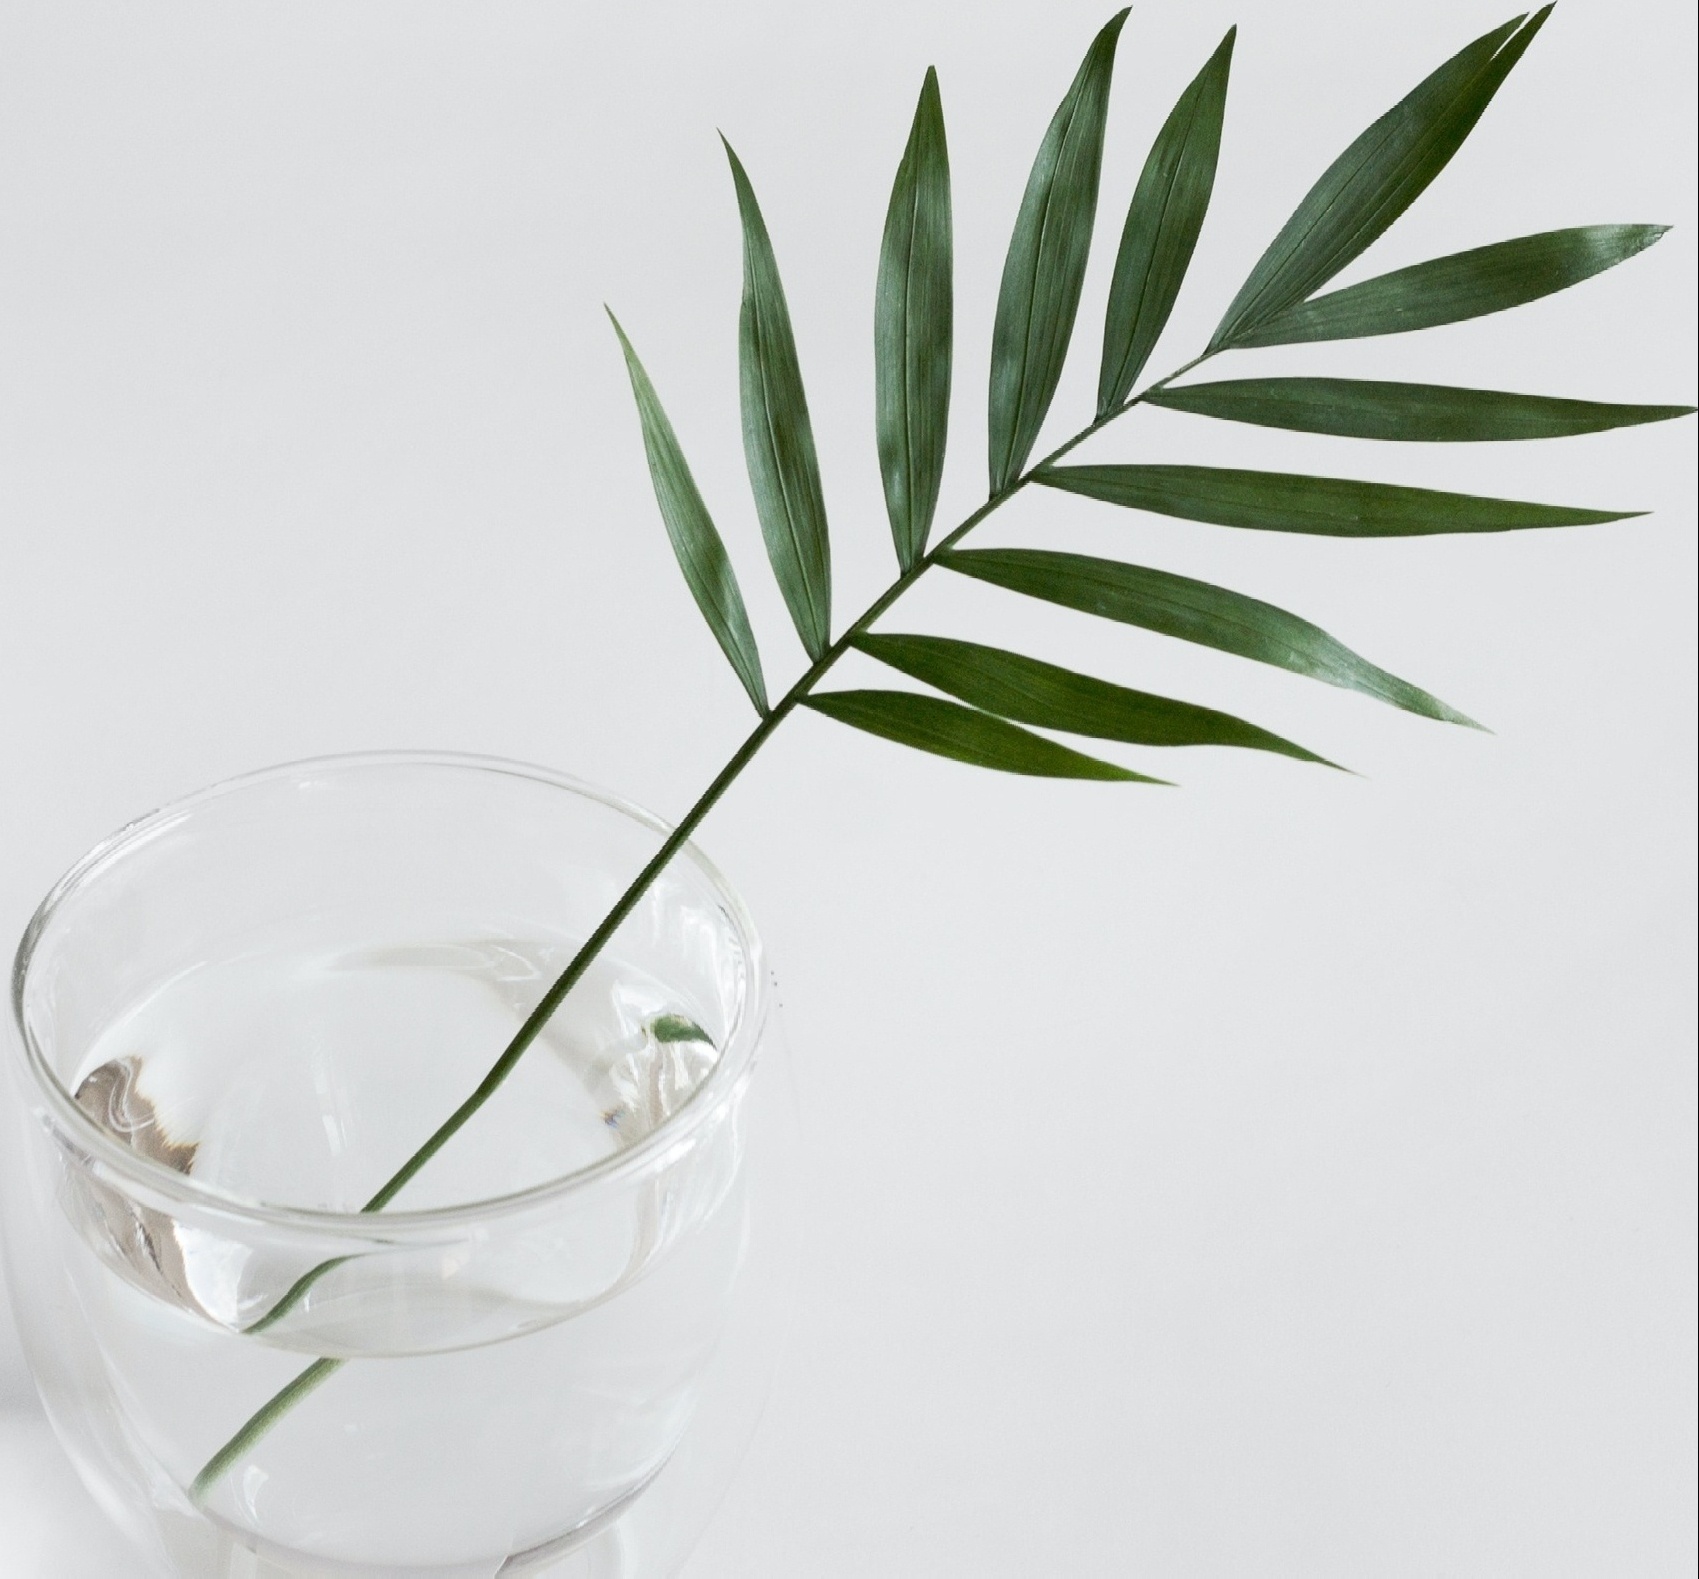 Image of a green palm leaf sitting in a glass bowl of water. Eye movement desensitization and reprocessing can help reduce the emotional charge of your traumatic memories. EMDR therapy will help you unlock and process memories that you might not know affect you. Call today to talk to an EMDR therapist in Orlando, FL 33601.